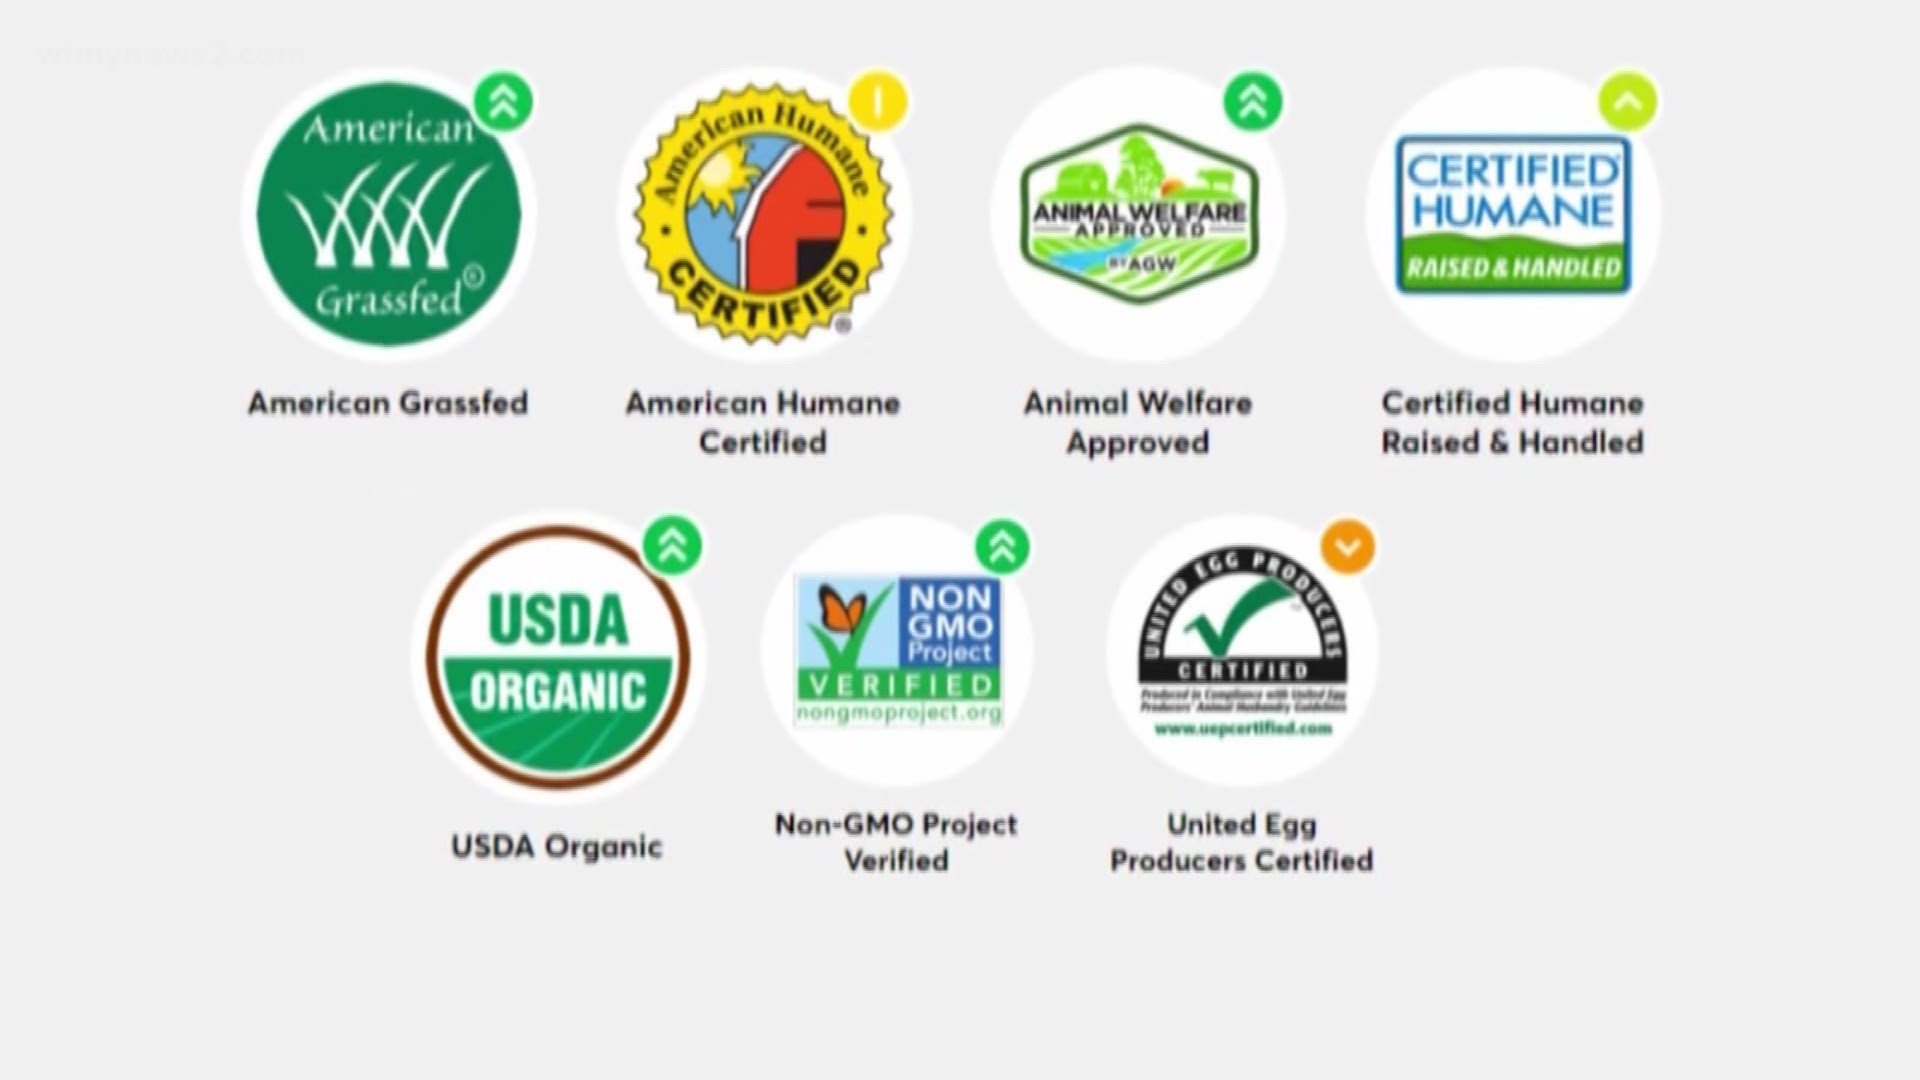 How do you actually know that food product label is organic or not?